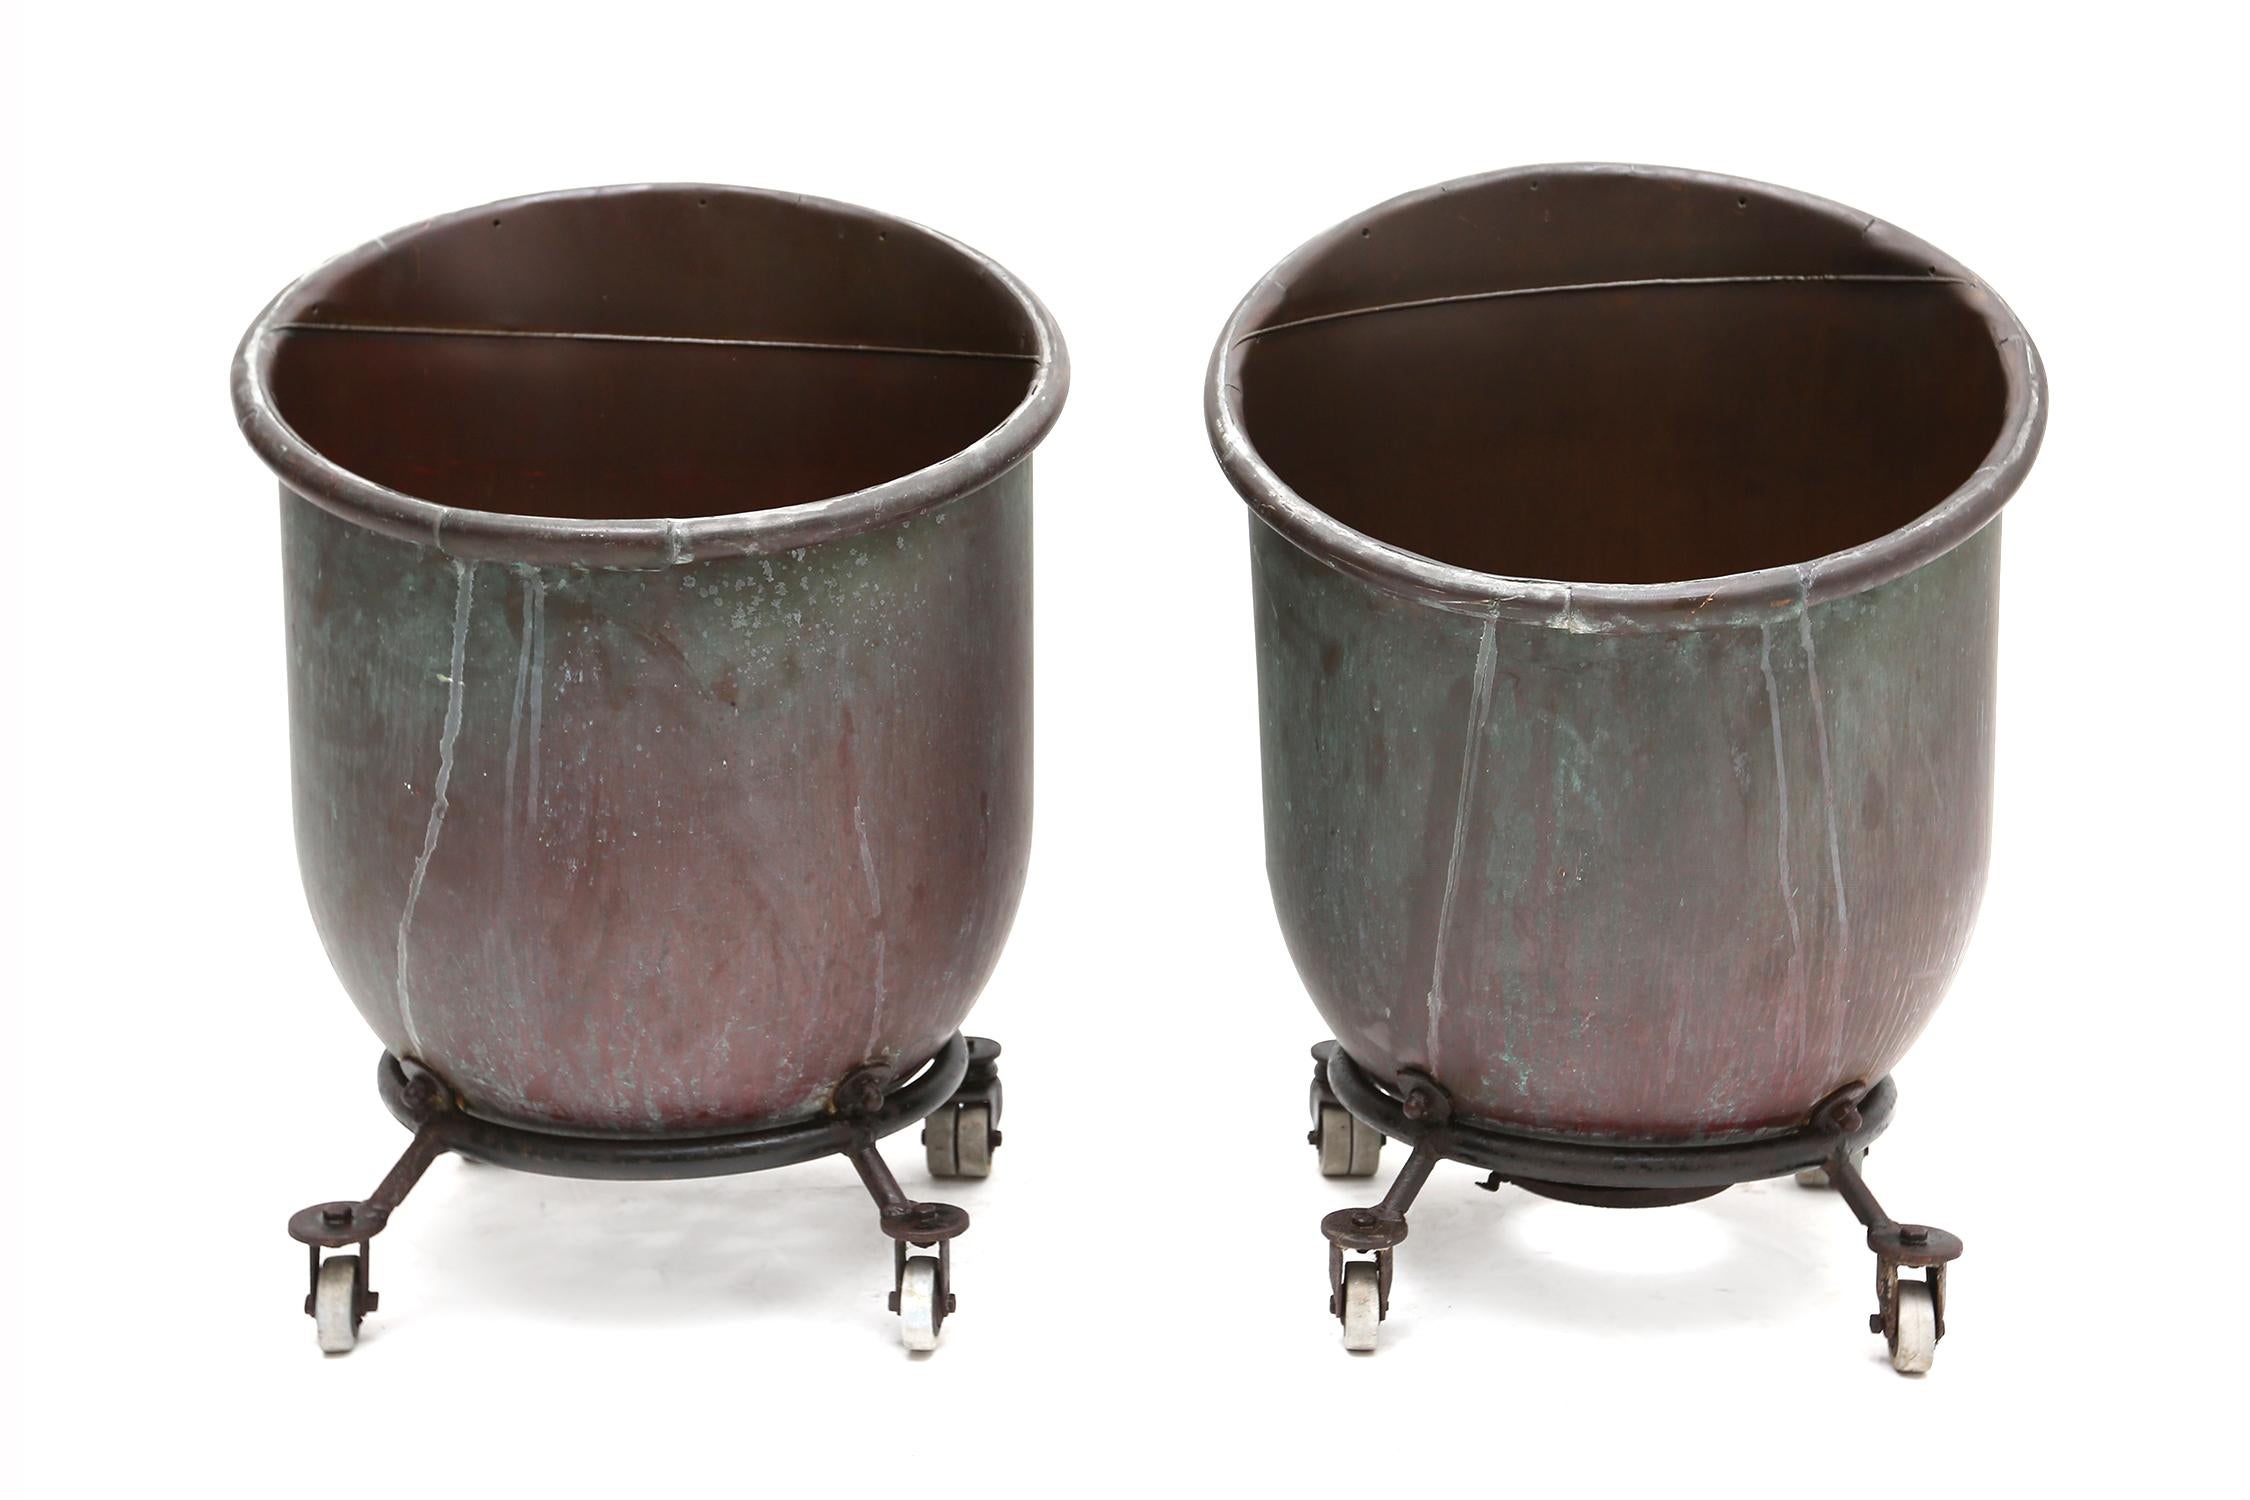 Industrial pair of bronze cachepots.

They're from our private collection and serve as planters.
Super unusual and decorative.
 